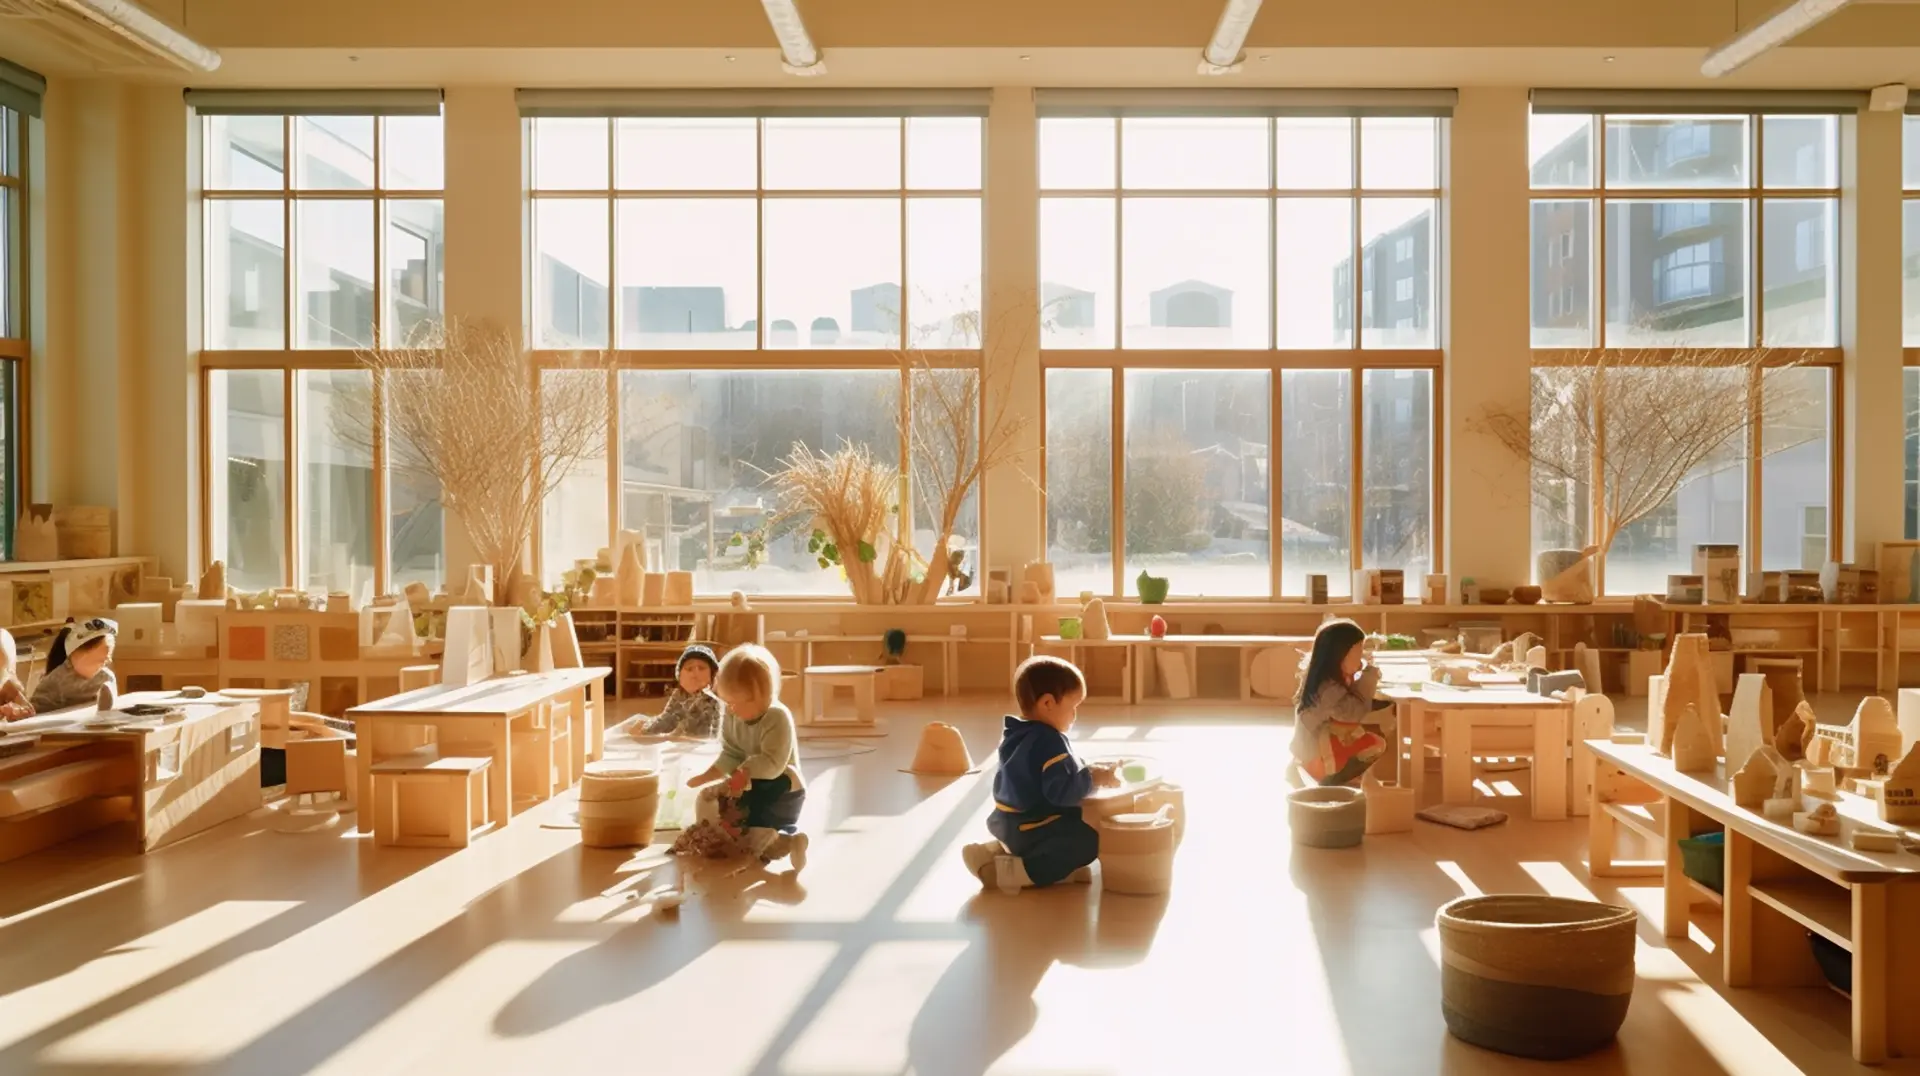 Children take part in a Montessori activity in a room furnished with wooden tables and chairs.